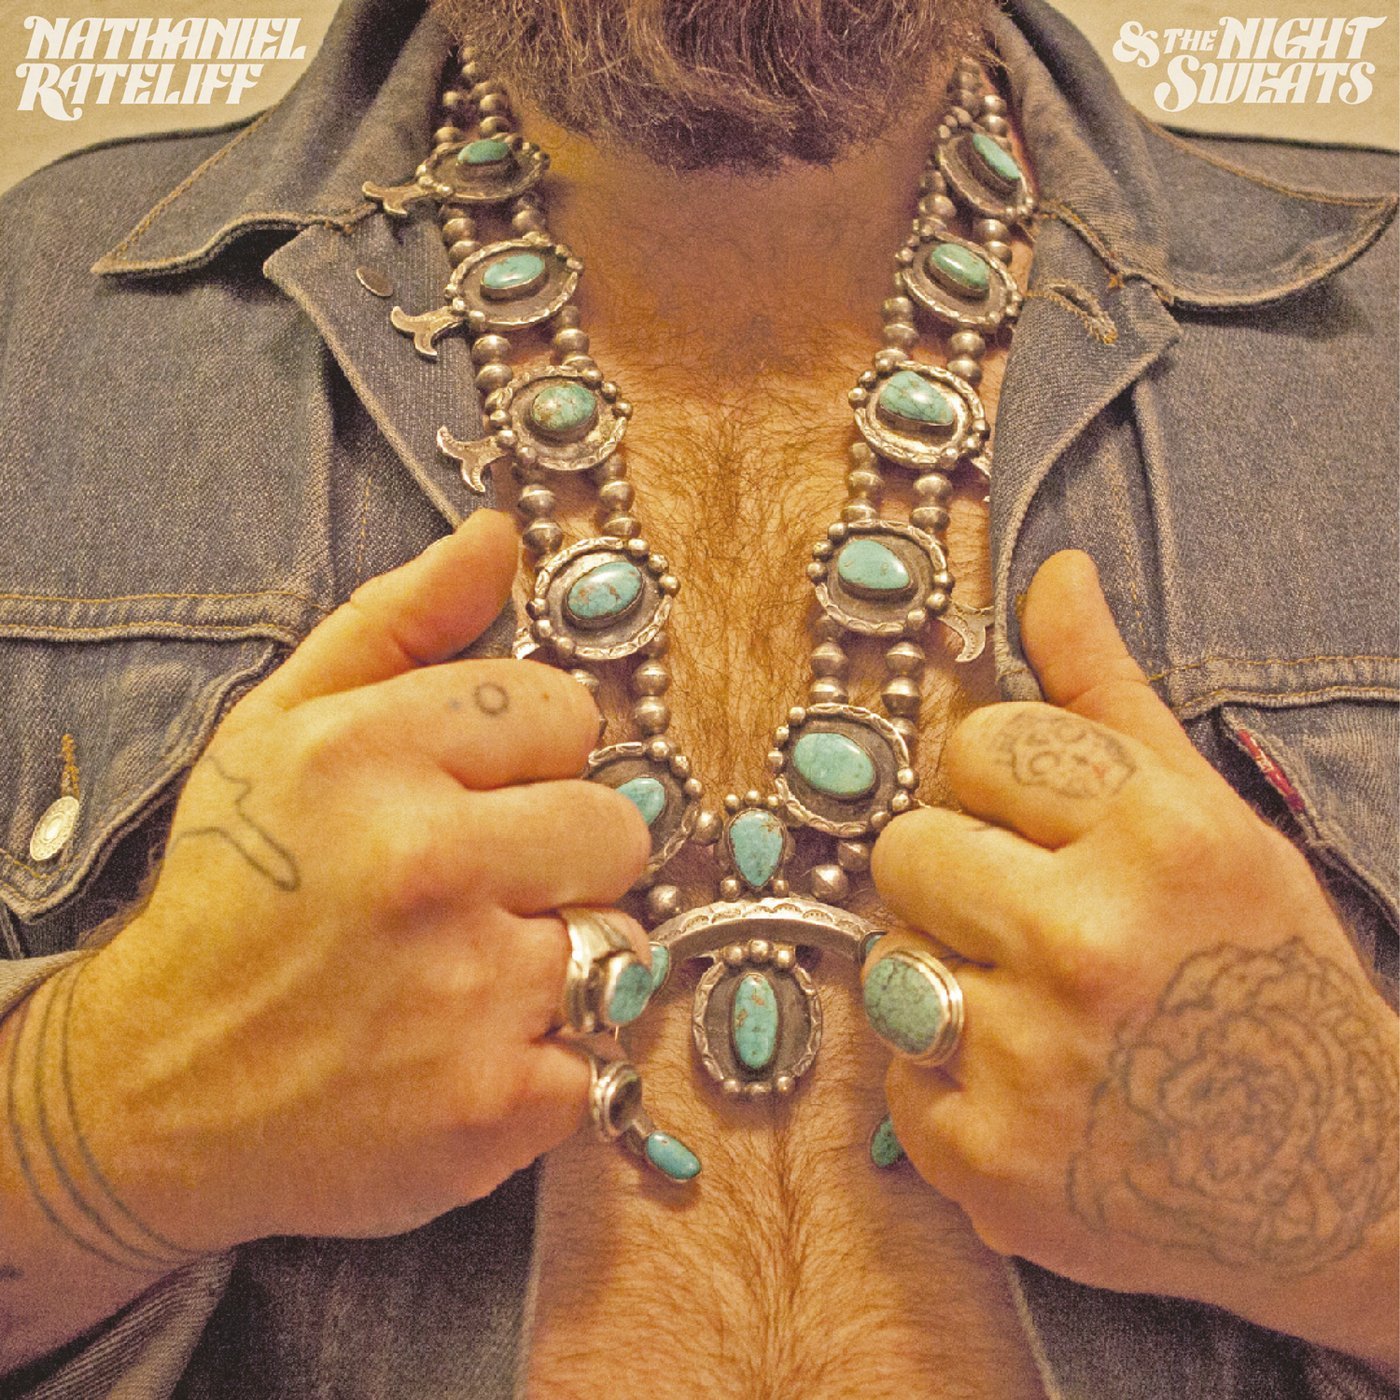 nathaniel-rateliff-and-the-night-sweats